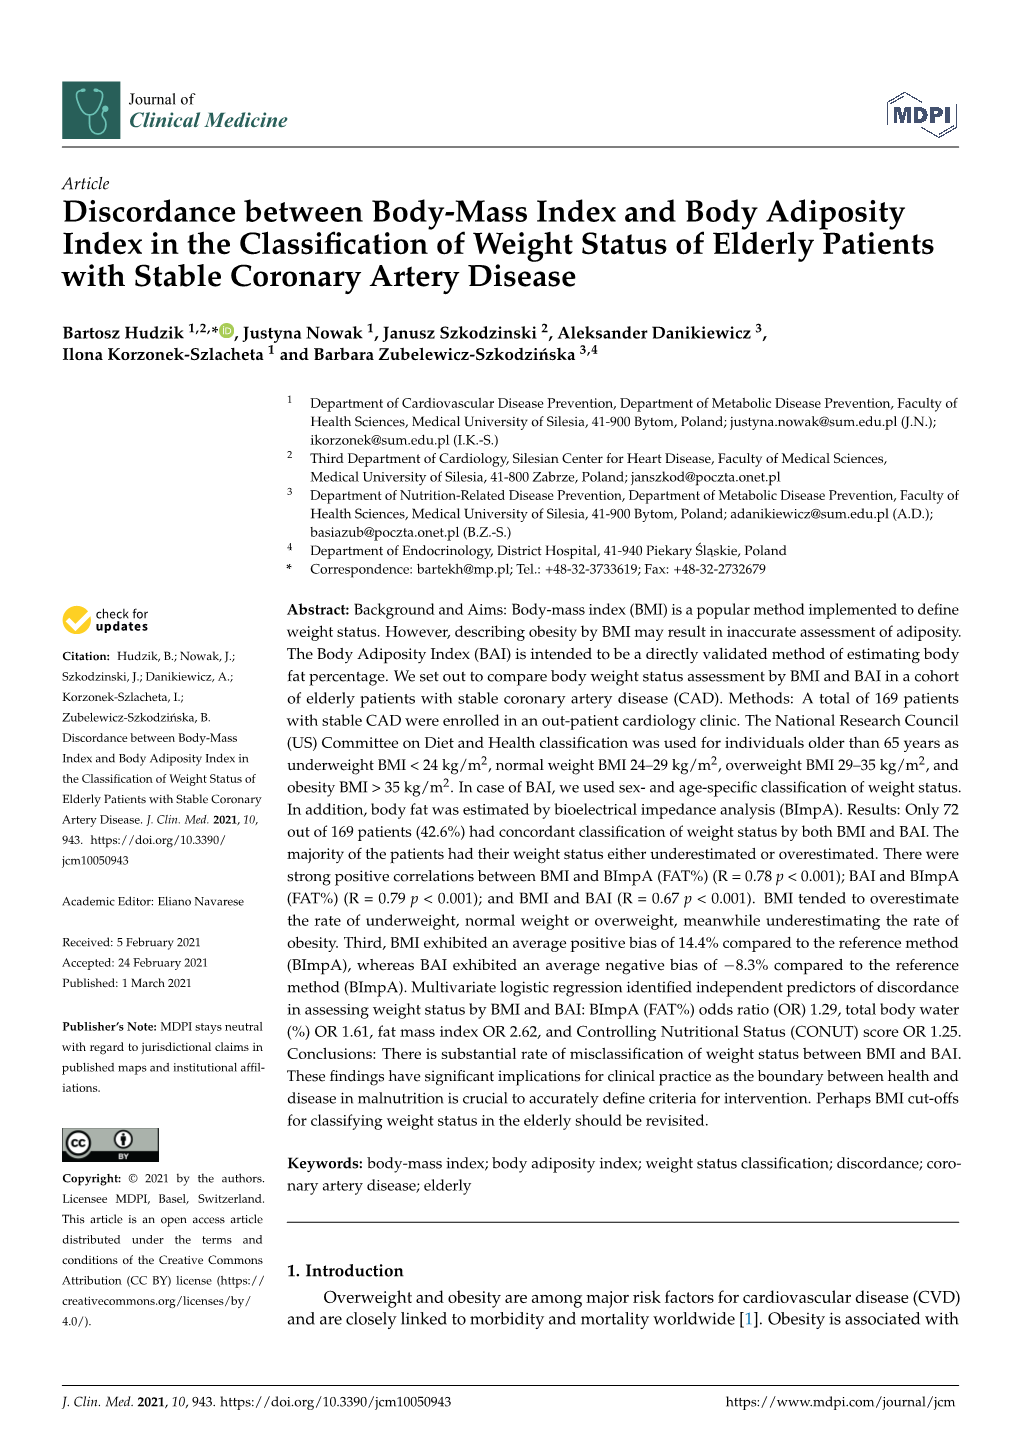 Discordance Between Body-Mass Index and Body Adiposity Index in the Classification of Weight Status of Elderly Patients With